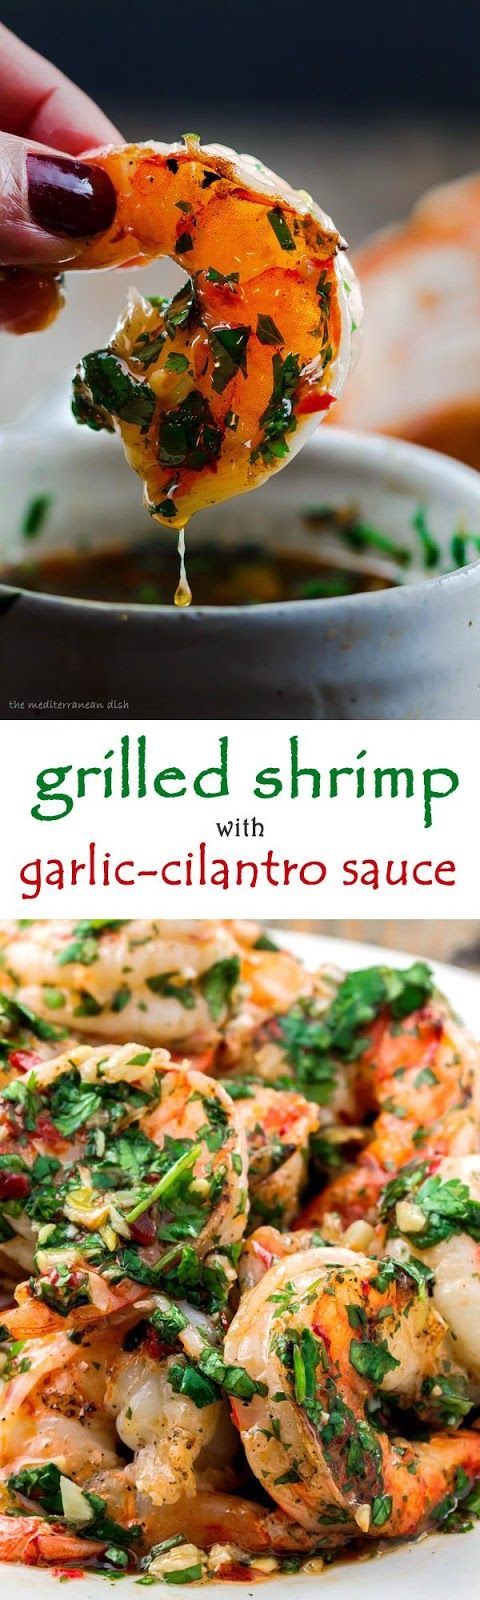 GRILLED SHRIMP RECIPE WITH ROASTED GARLIC-CILANTRO SAUCE – Recipes and Cooking…